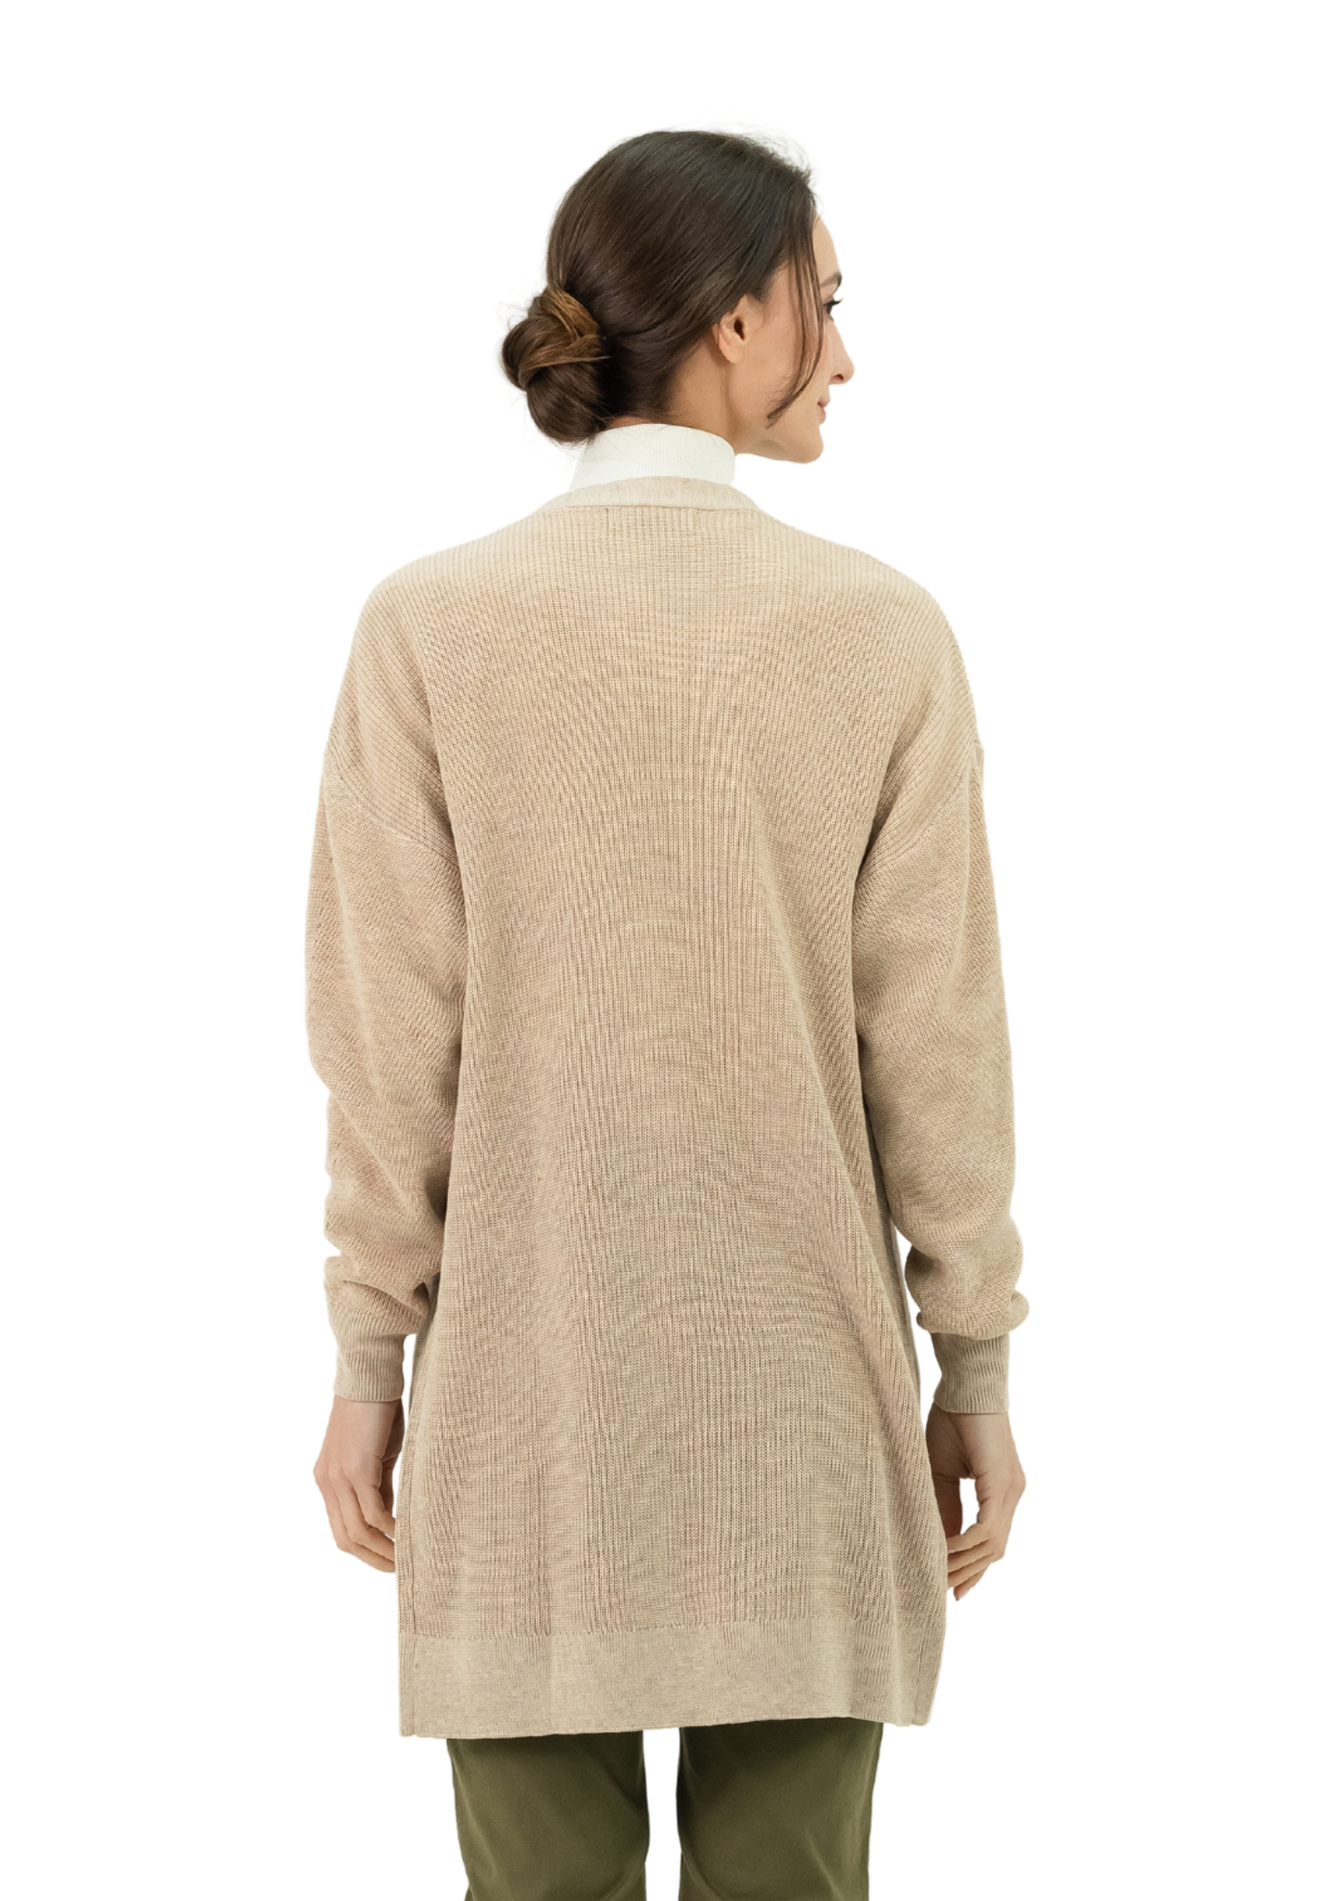 DAISY By VOIR Buttonless Open Flare Cardigan Sweater